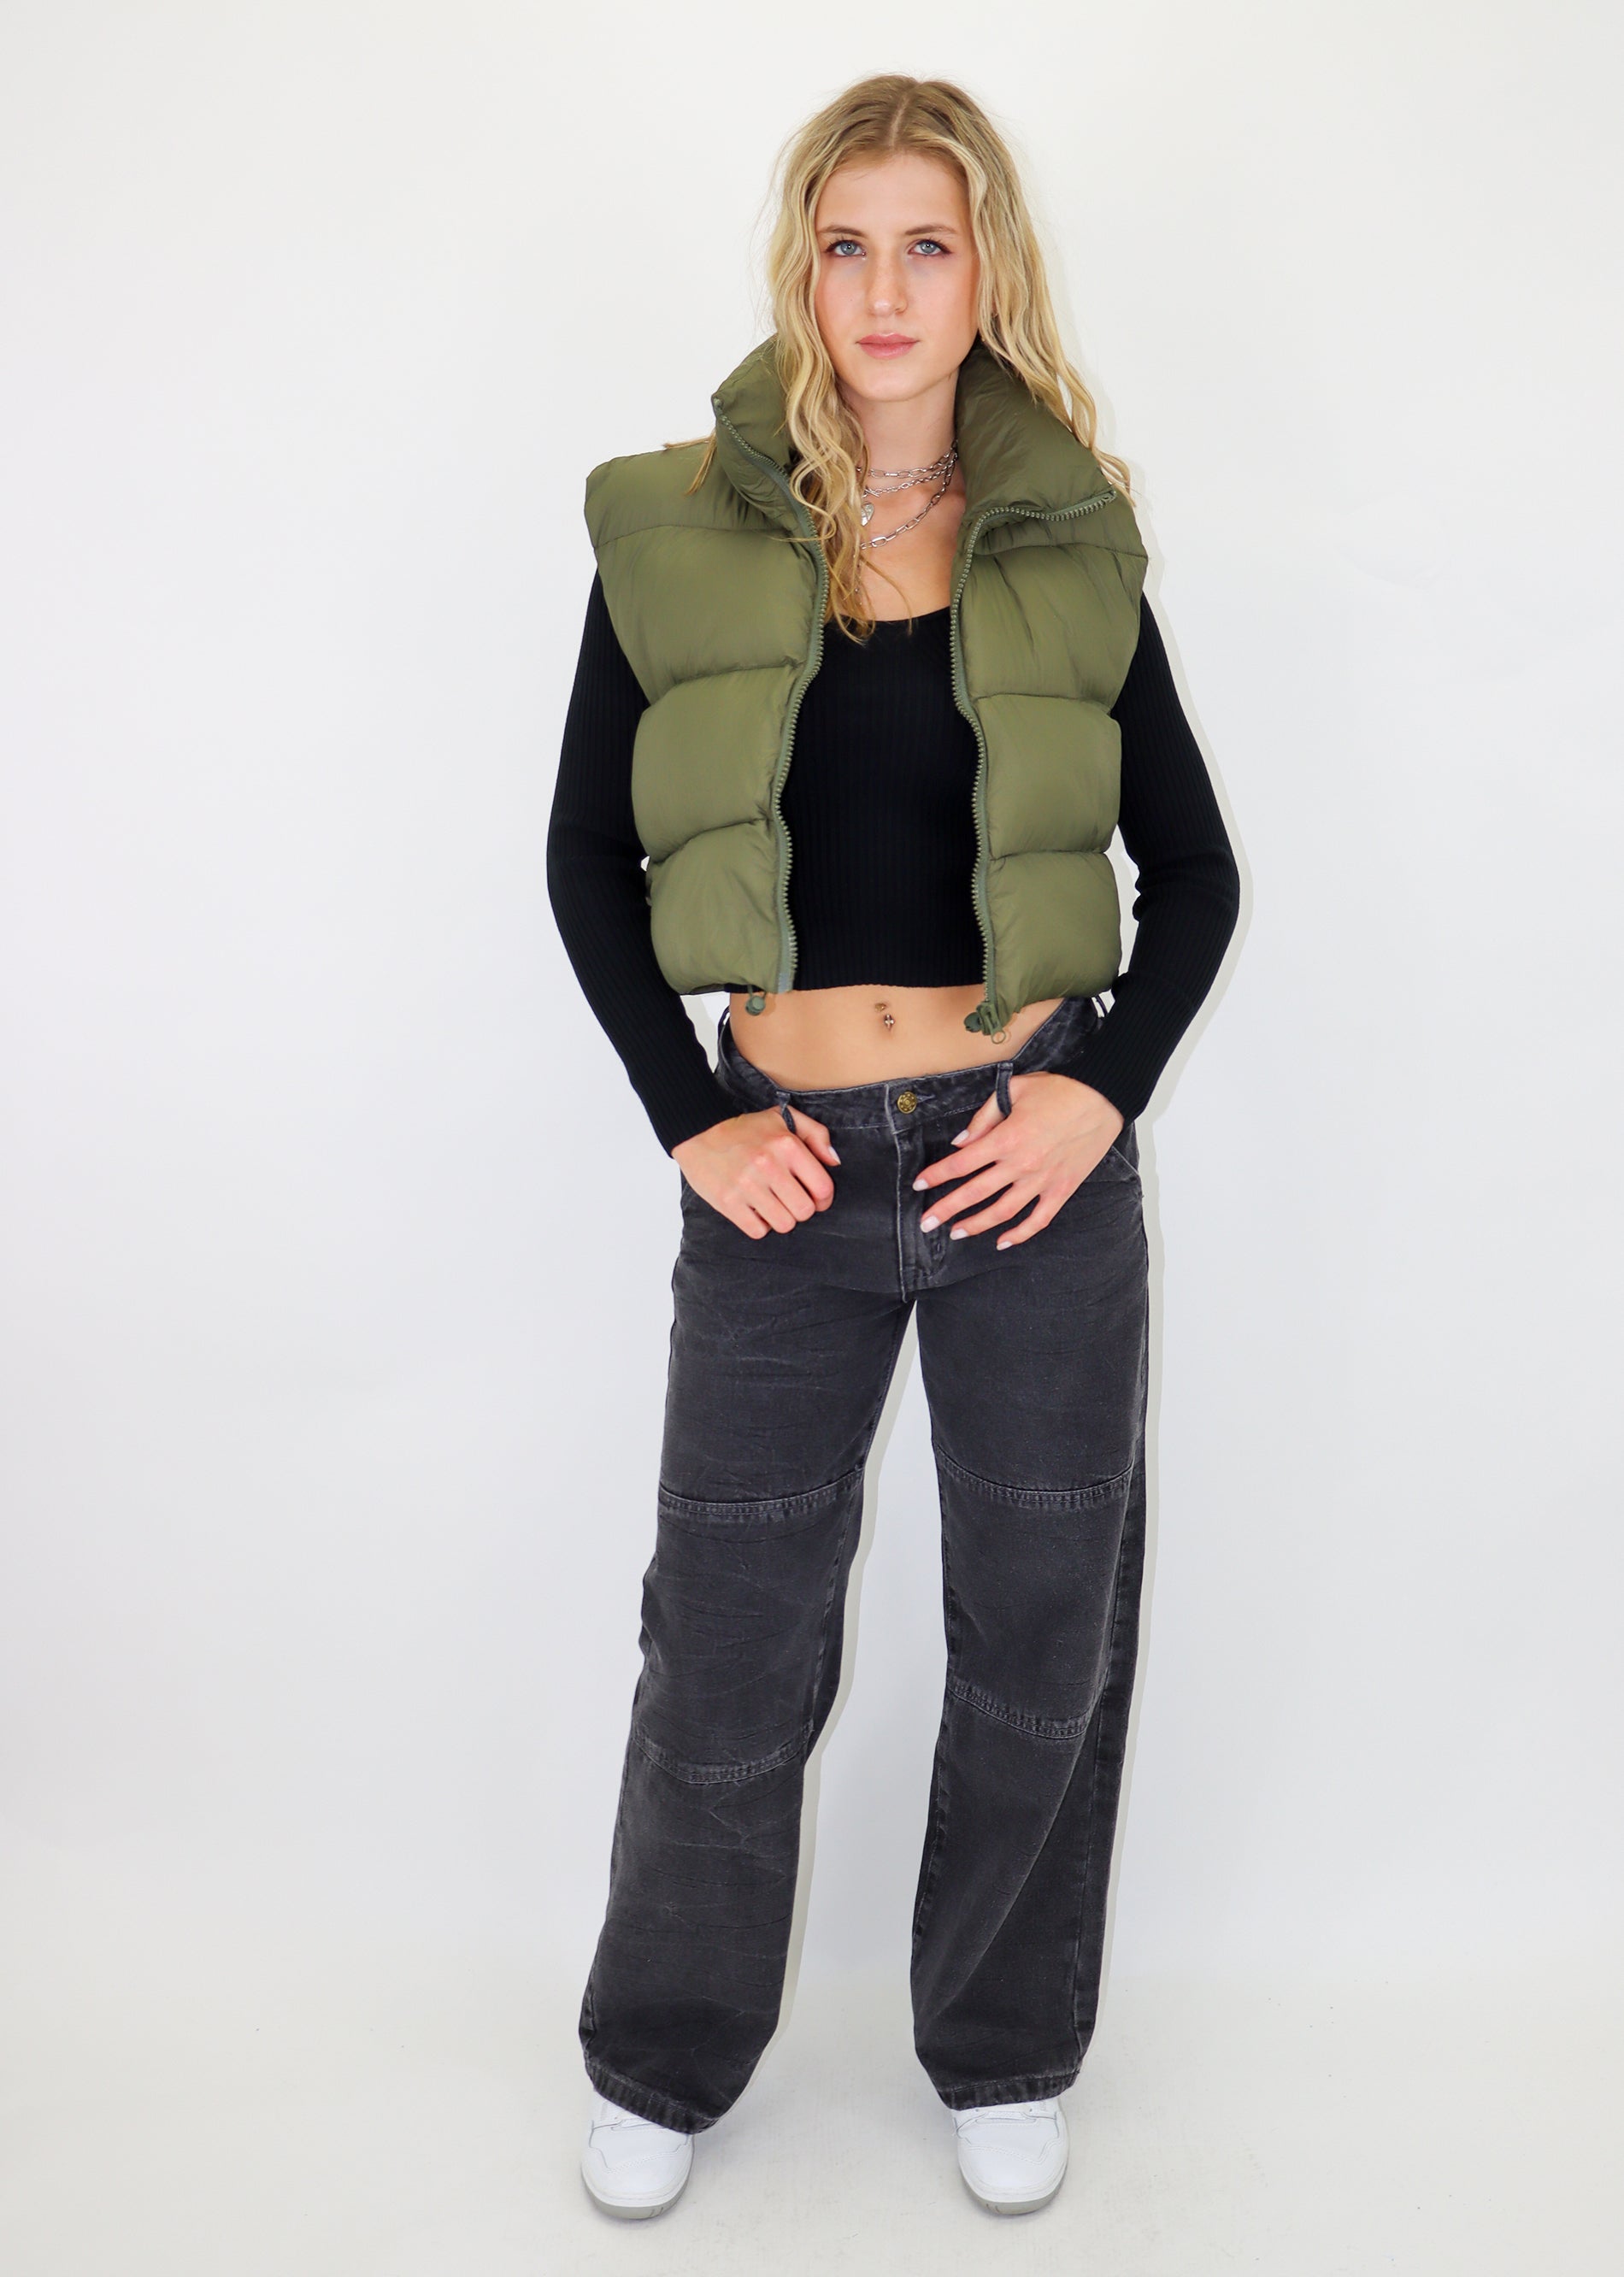 N On Love Rags Olive – The Run Green Rock Vest Puffer